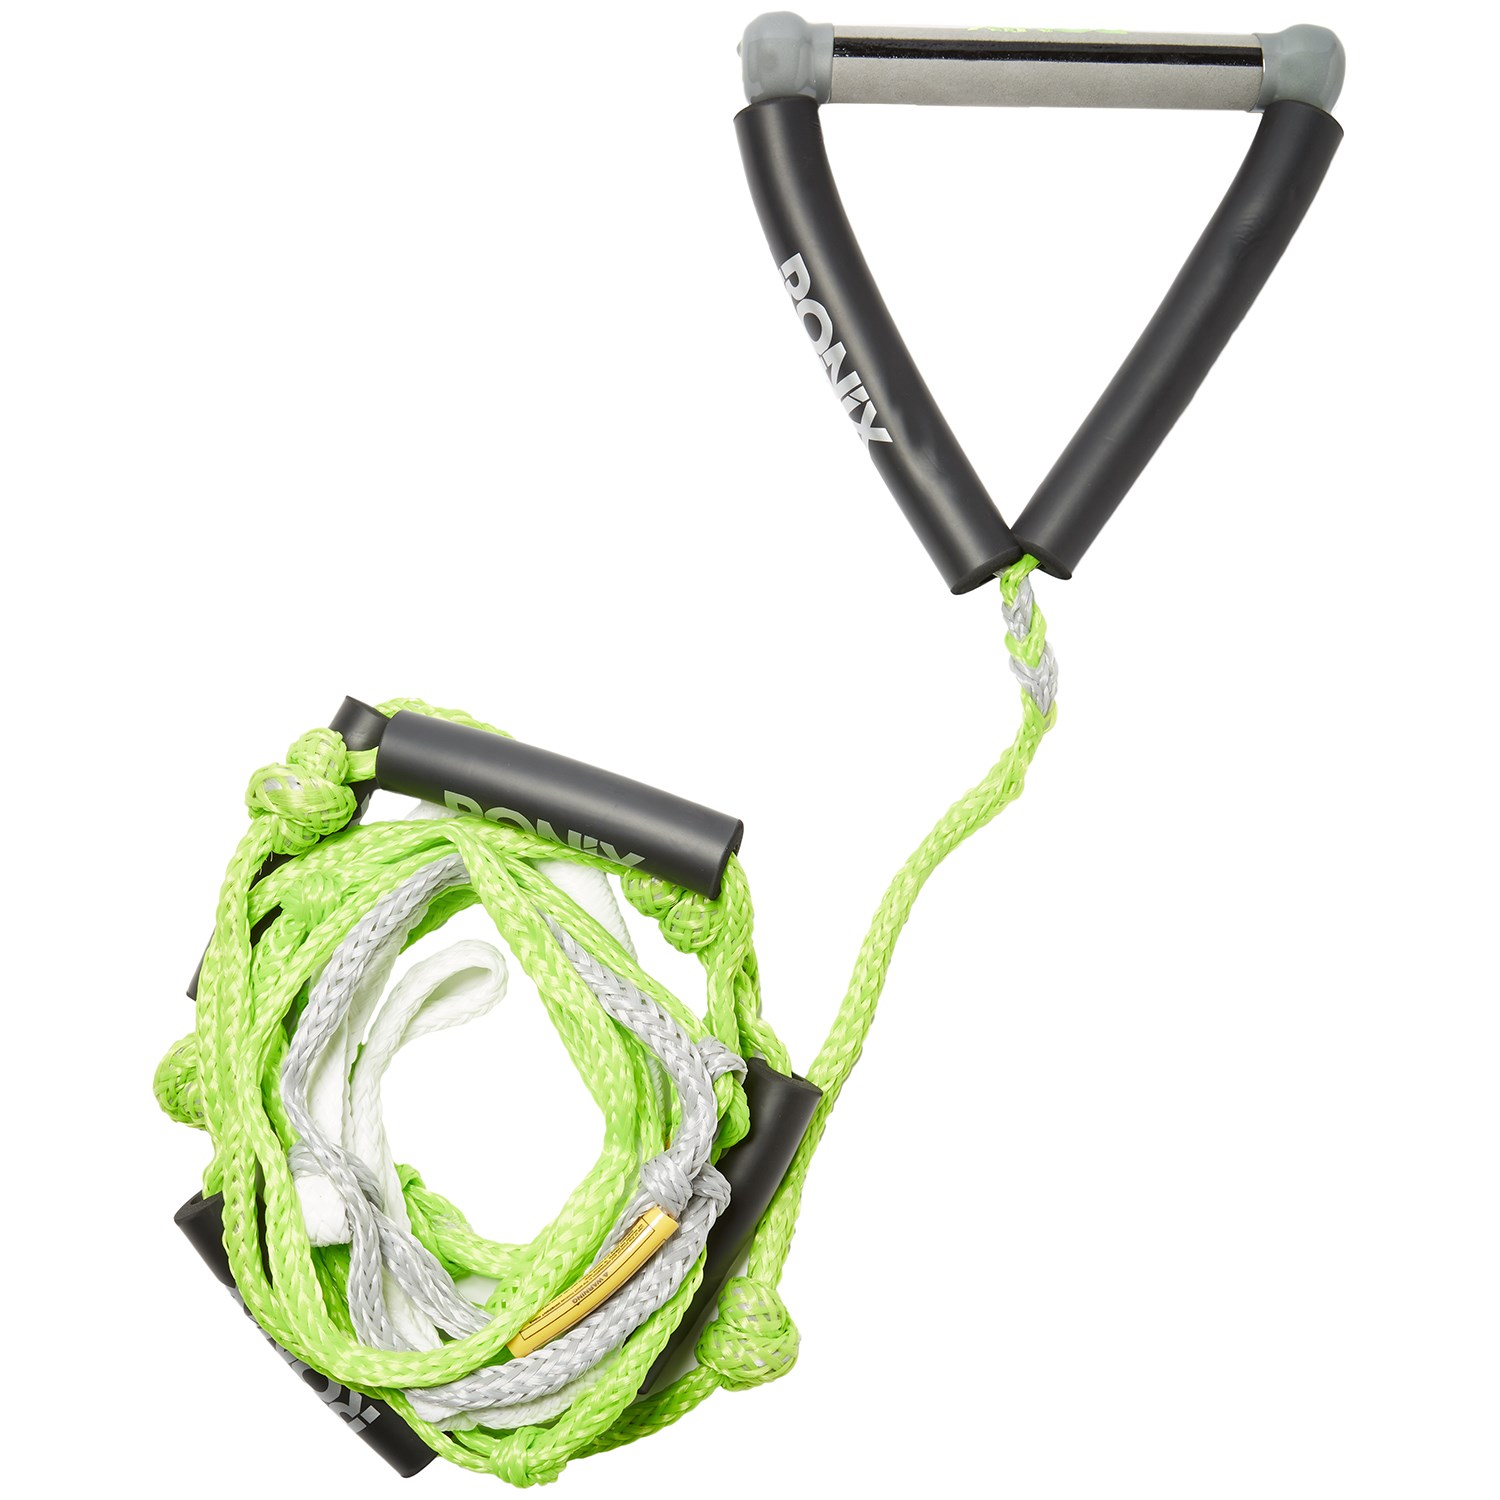 2020 Ronix 25' Bungee Surf Rope with Handle Silver/White 